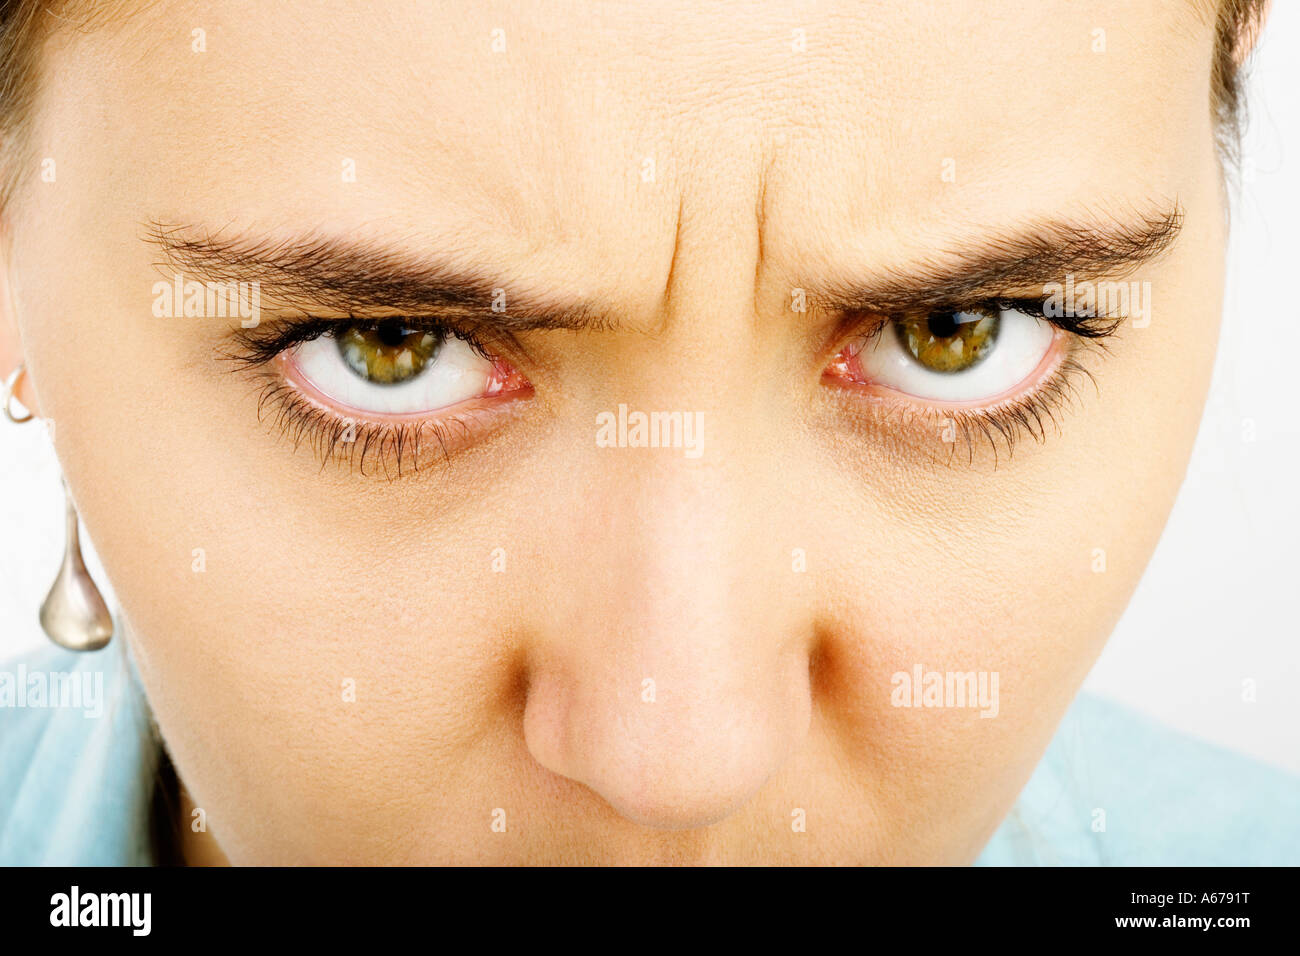 Close up of woman's face with intense, angry expression. Stock Photo